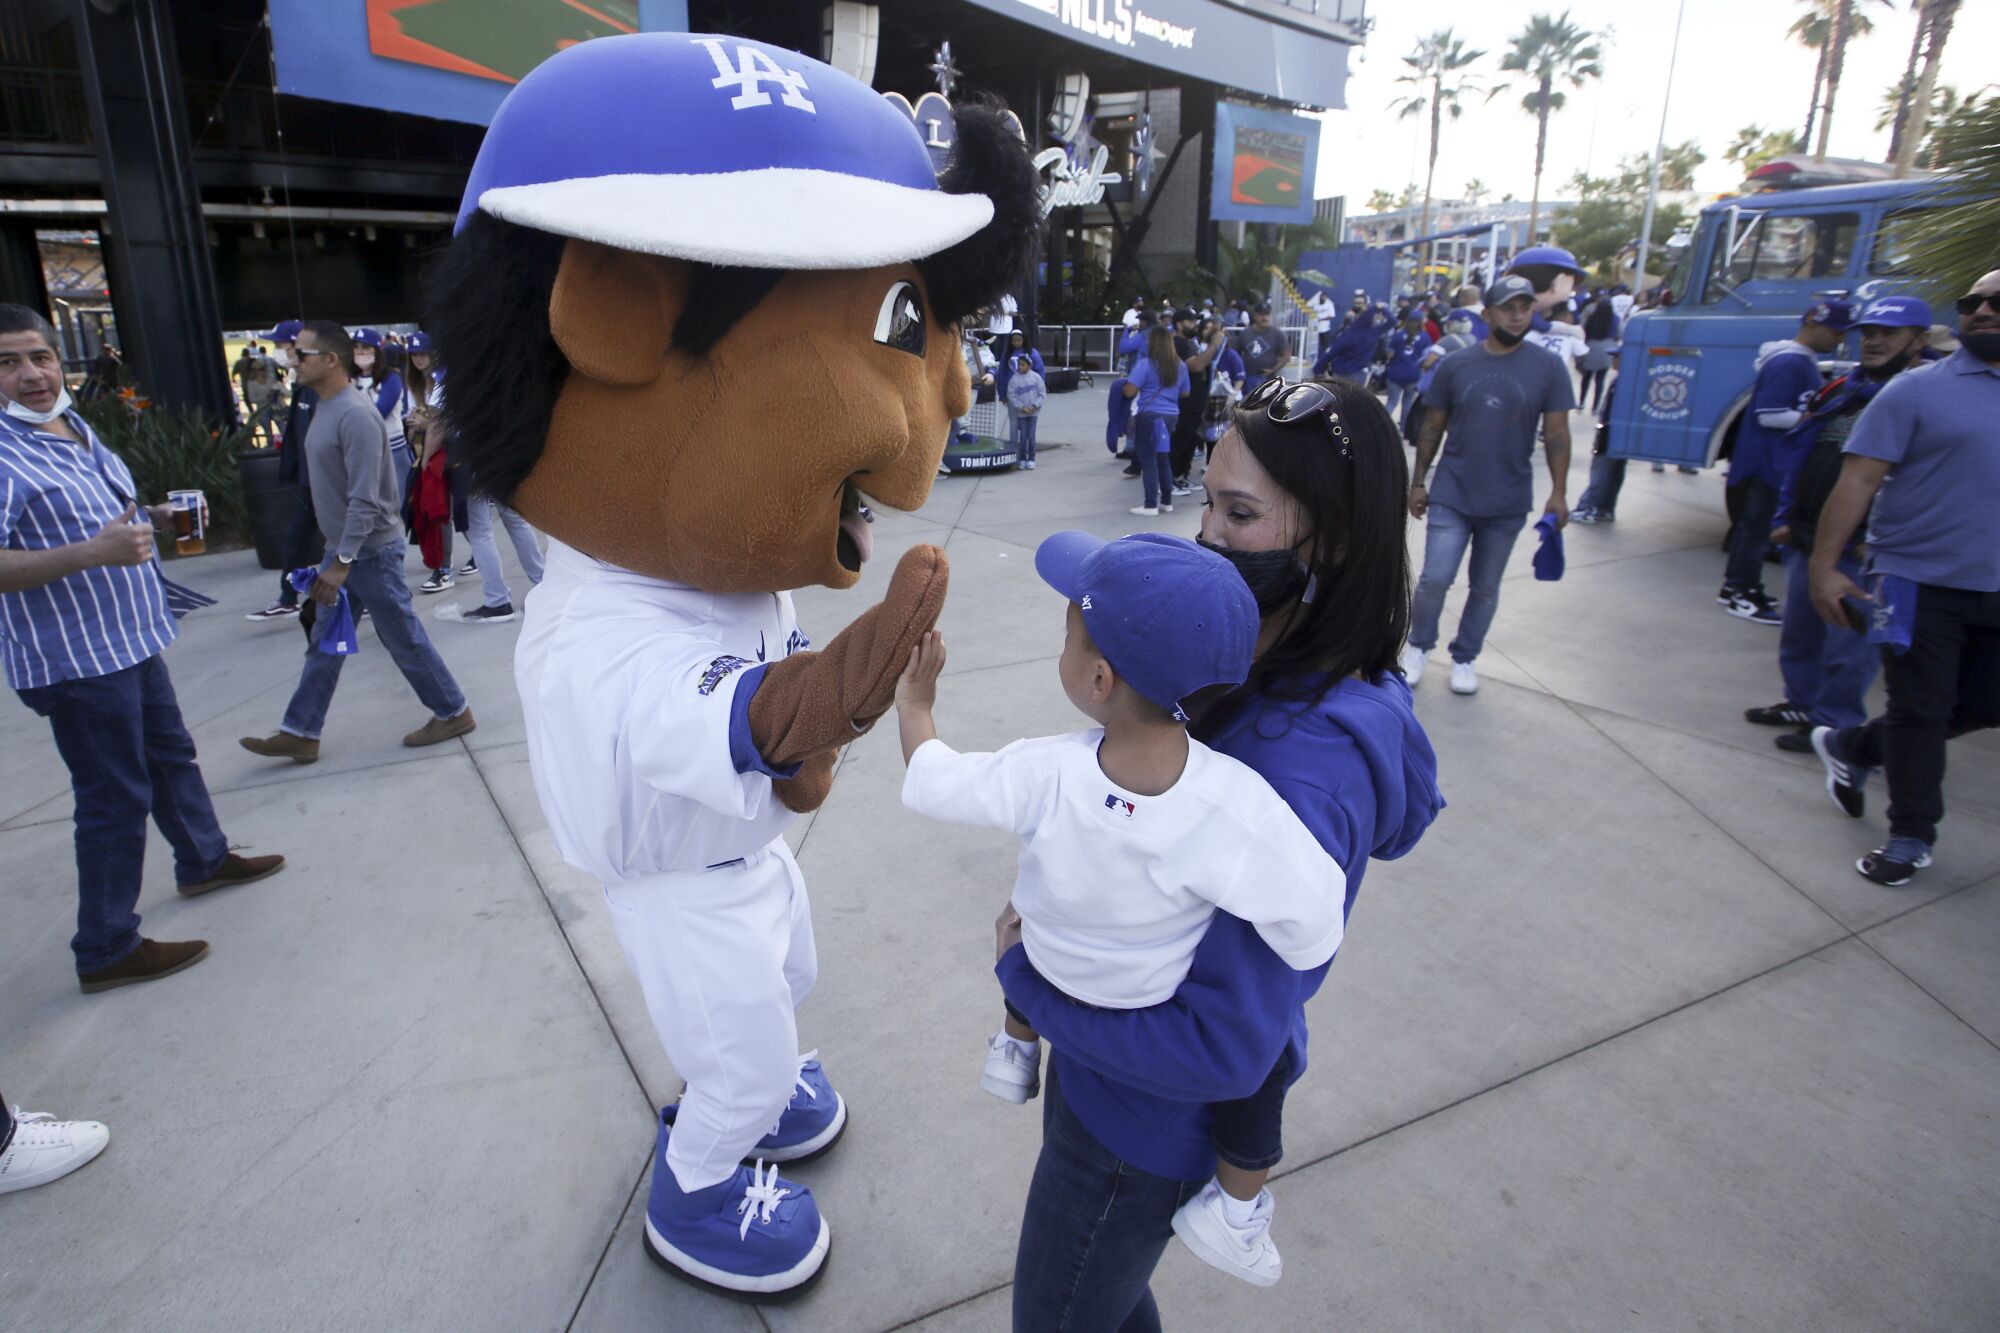  Dodgers bobblehead character greets fans.